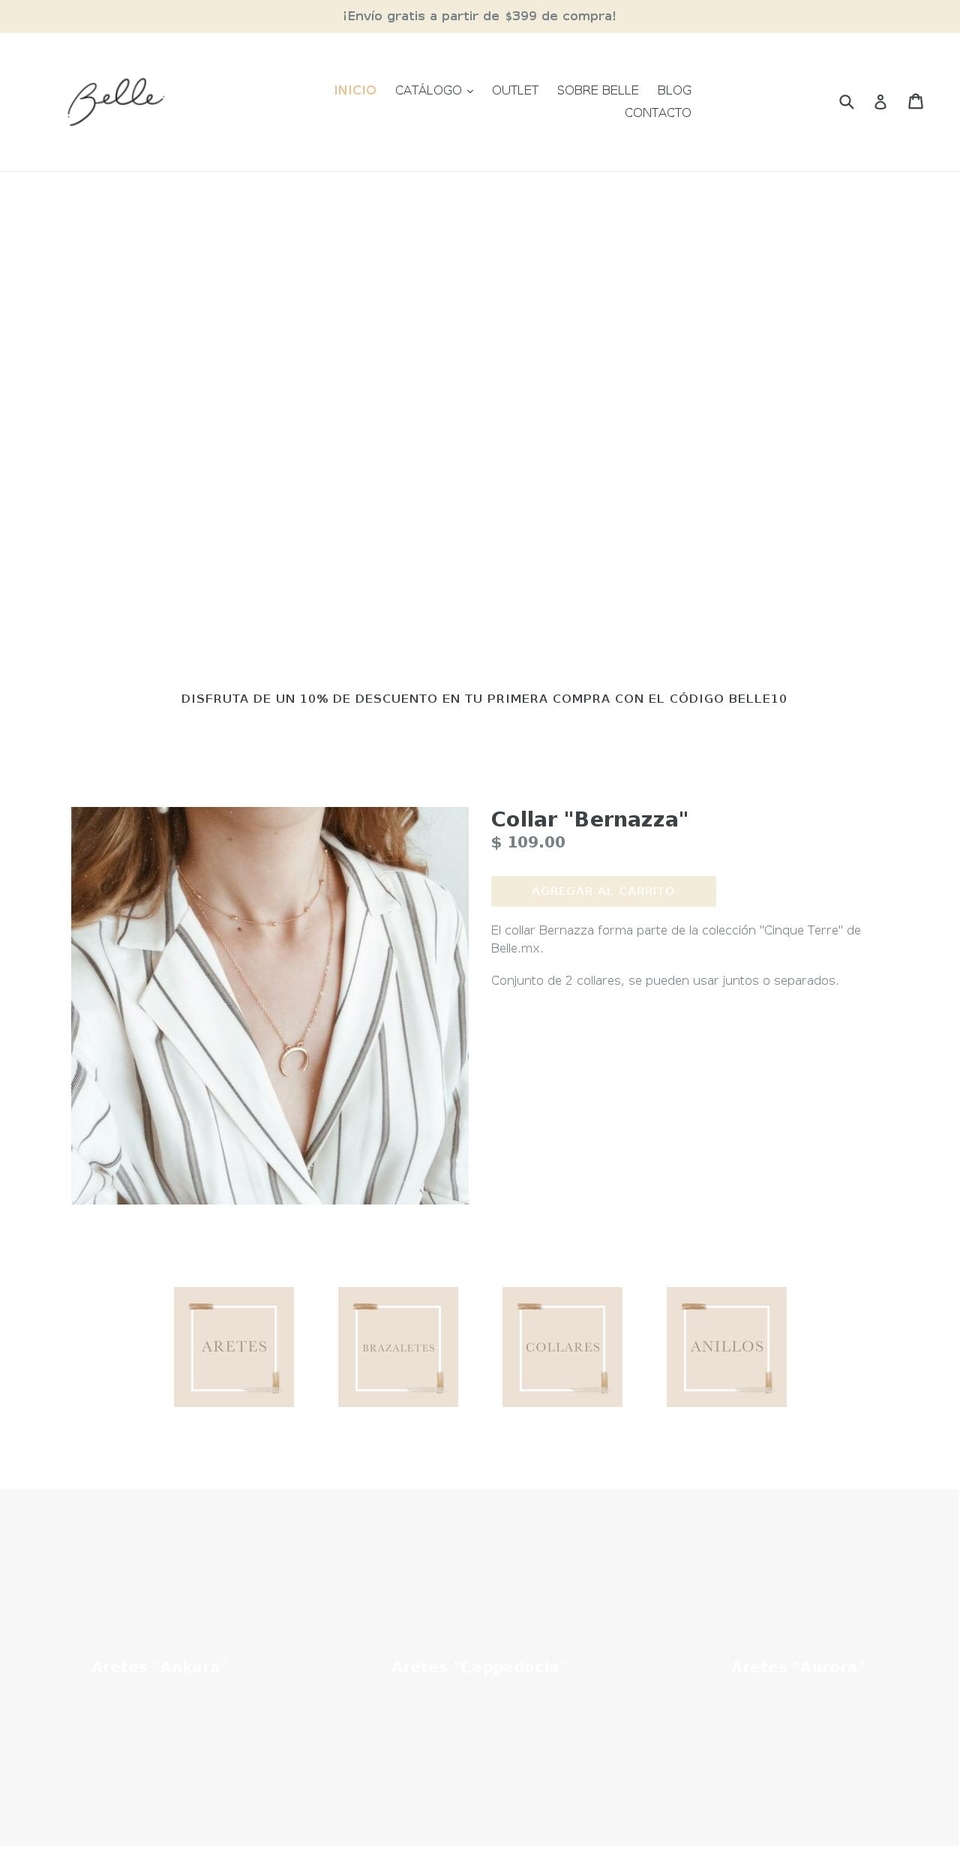 belle Shopify theme site example belle.mx